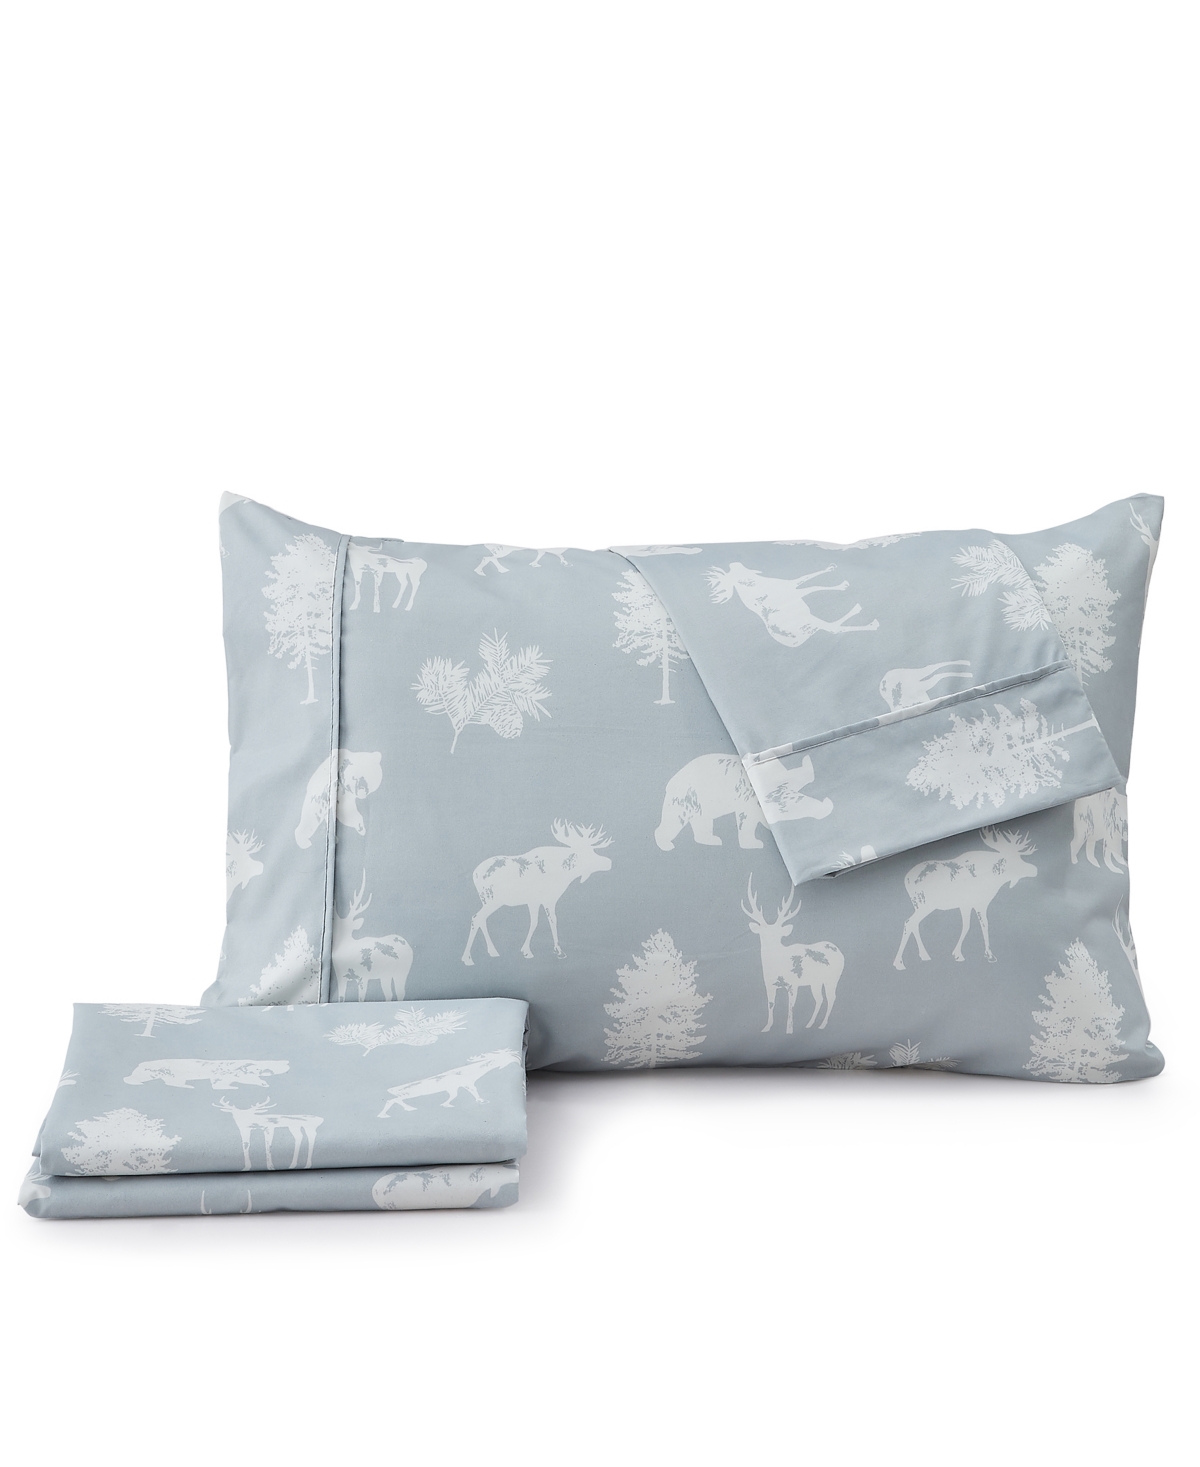 Premium Comforts Rustic Lodge Printed Microfiber 3 Piece Sheet Set, Twin In Lodge - Forest Animal - Light Gray